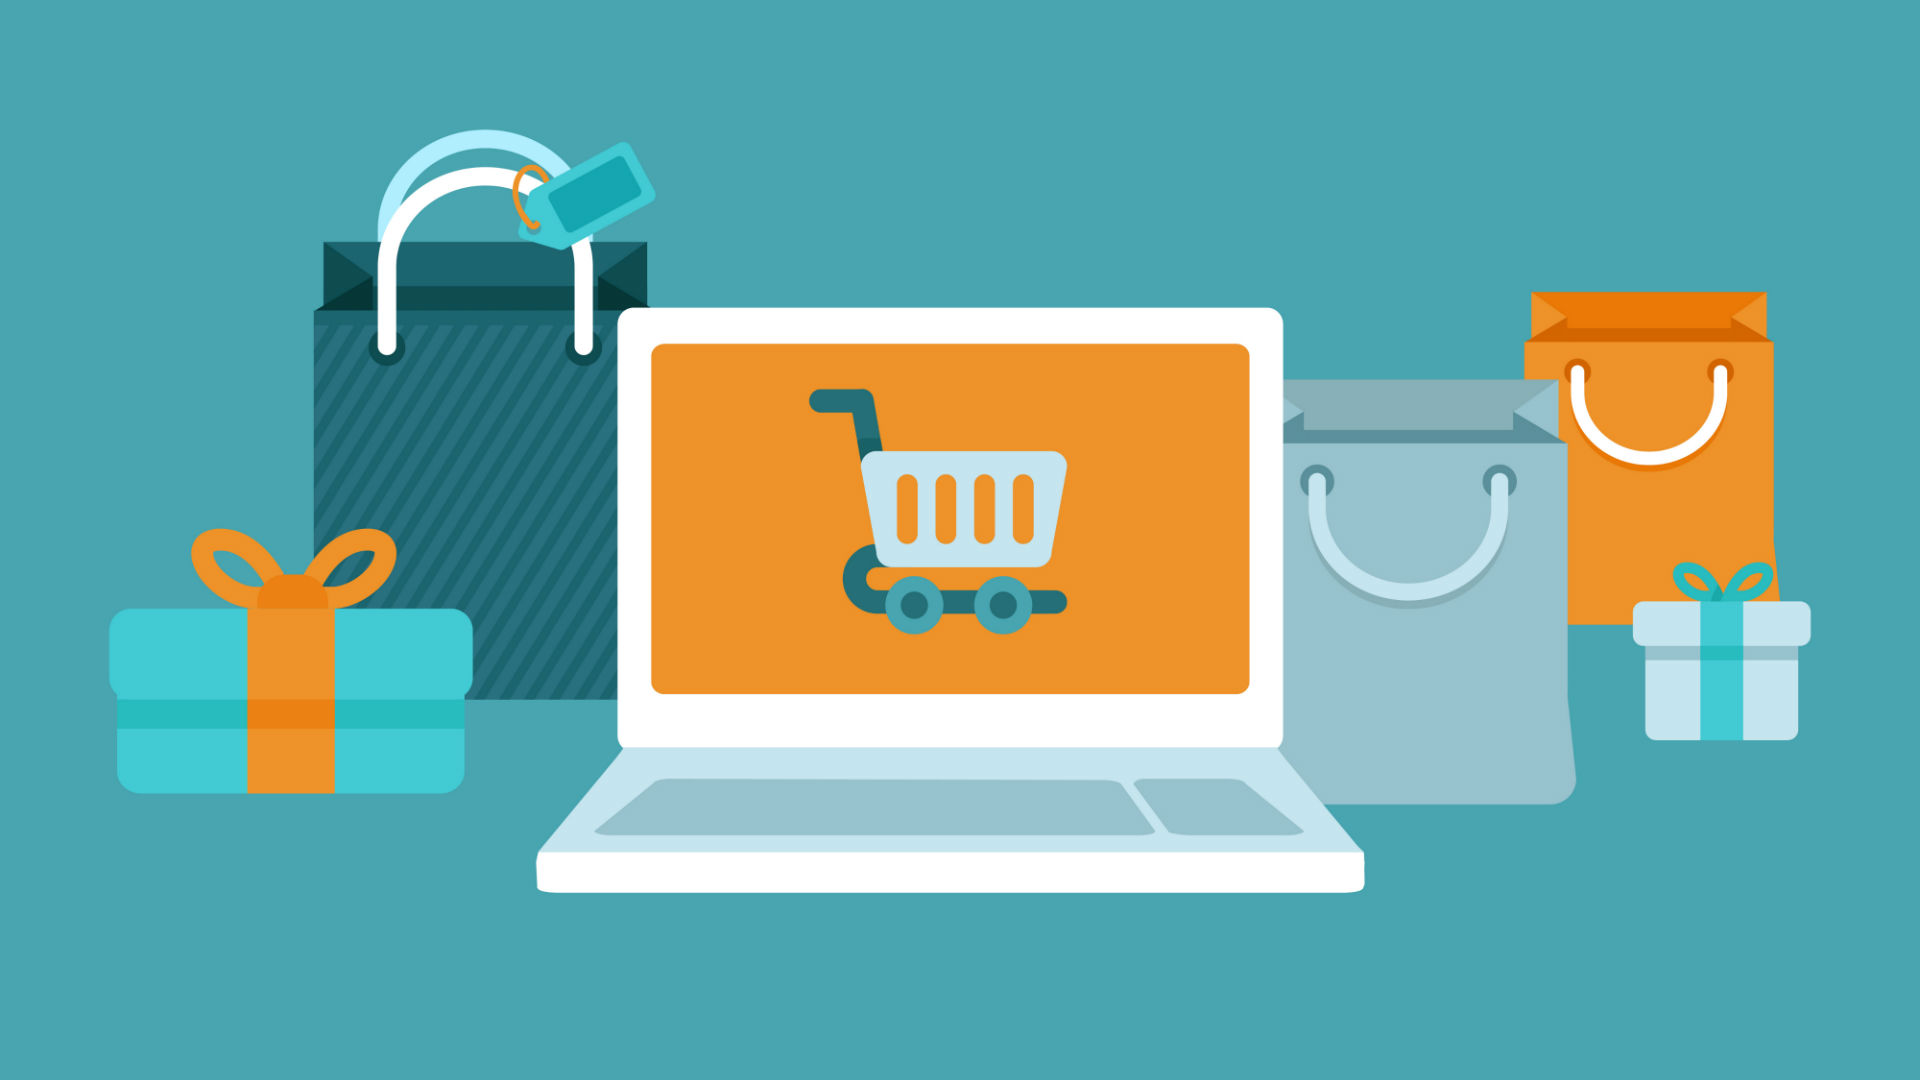 7 SEO Tips for an Redesigning an Ecommerce Website